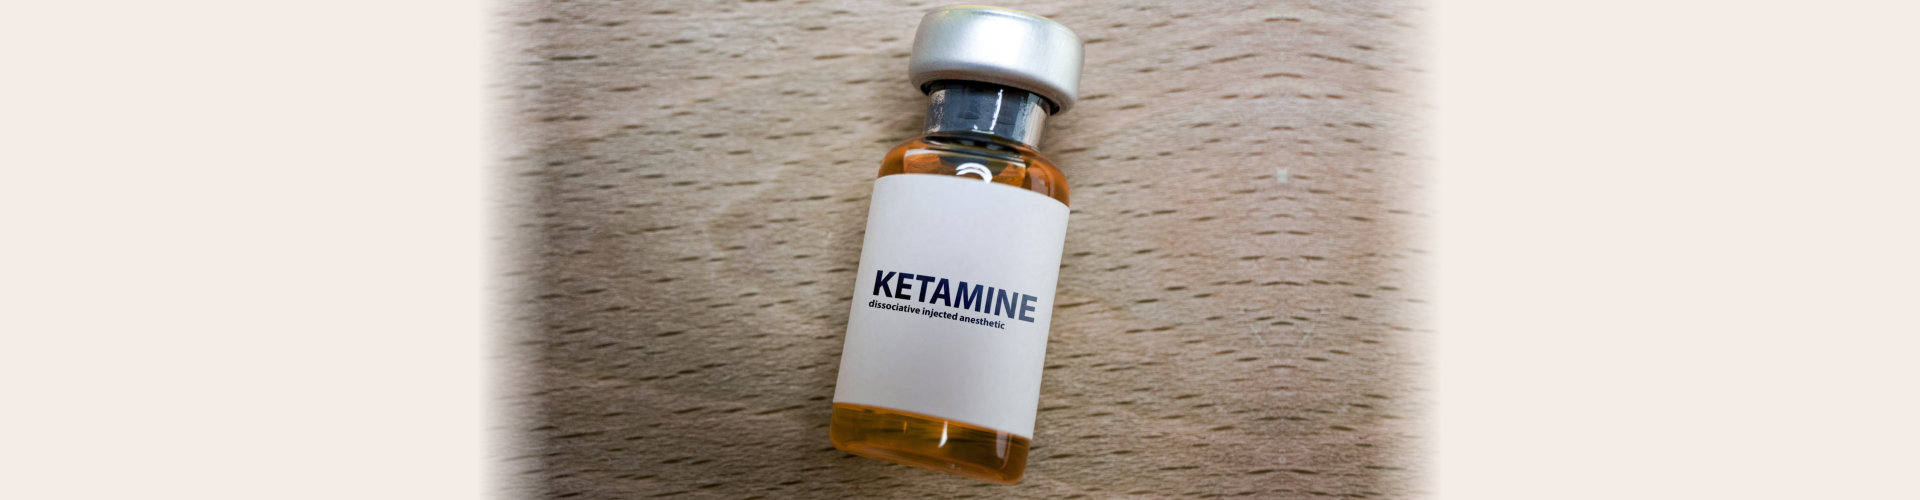 Ketamine medical bottle of medication dissociative anesthetic used for induction and maintenance of anesthesia and acute pain treatment and for seizures in status epilepticus